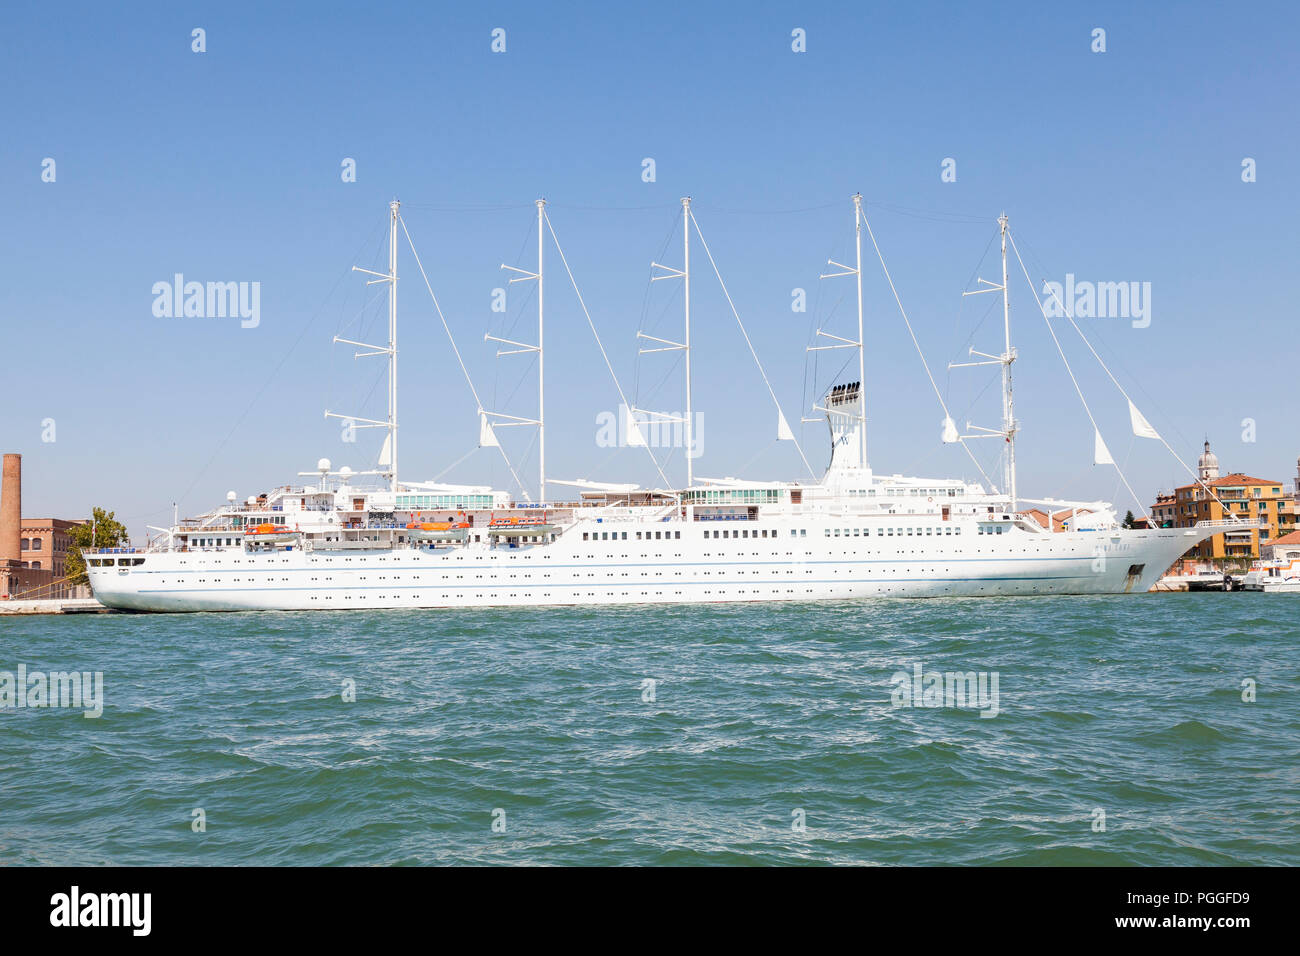 Fve-mast staysail schooner, Wind Surf, moored in Venice, Veneto, Italy. Largest passenger sailing yacht in the world, flagship of Windstar cruises Stock Photo